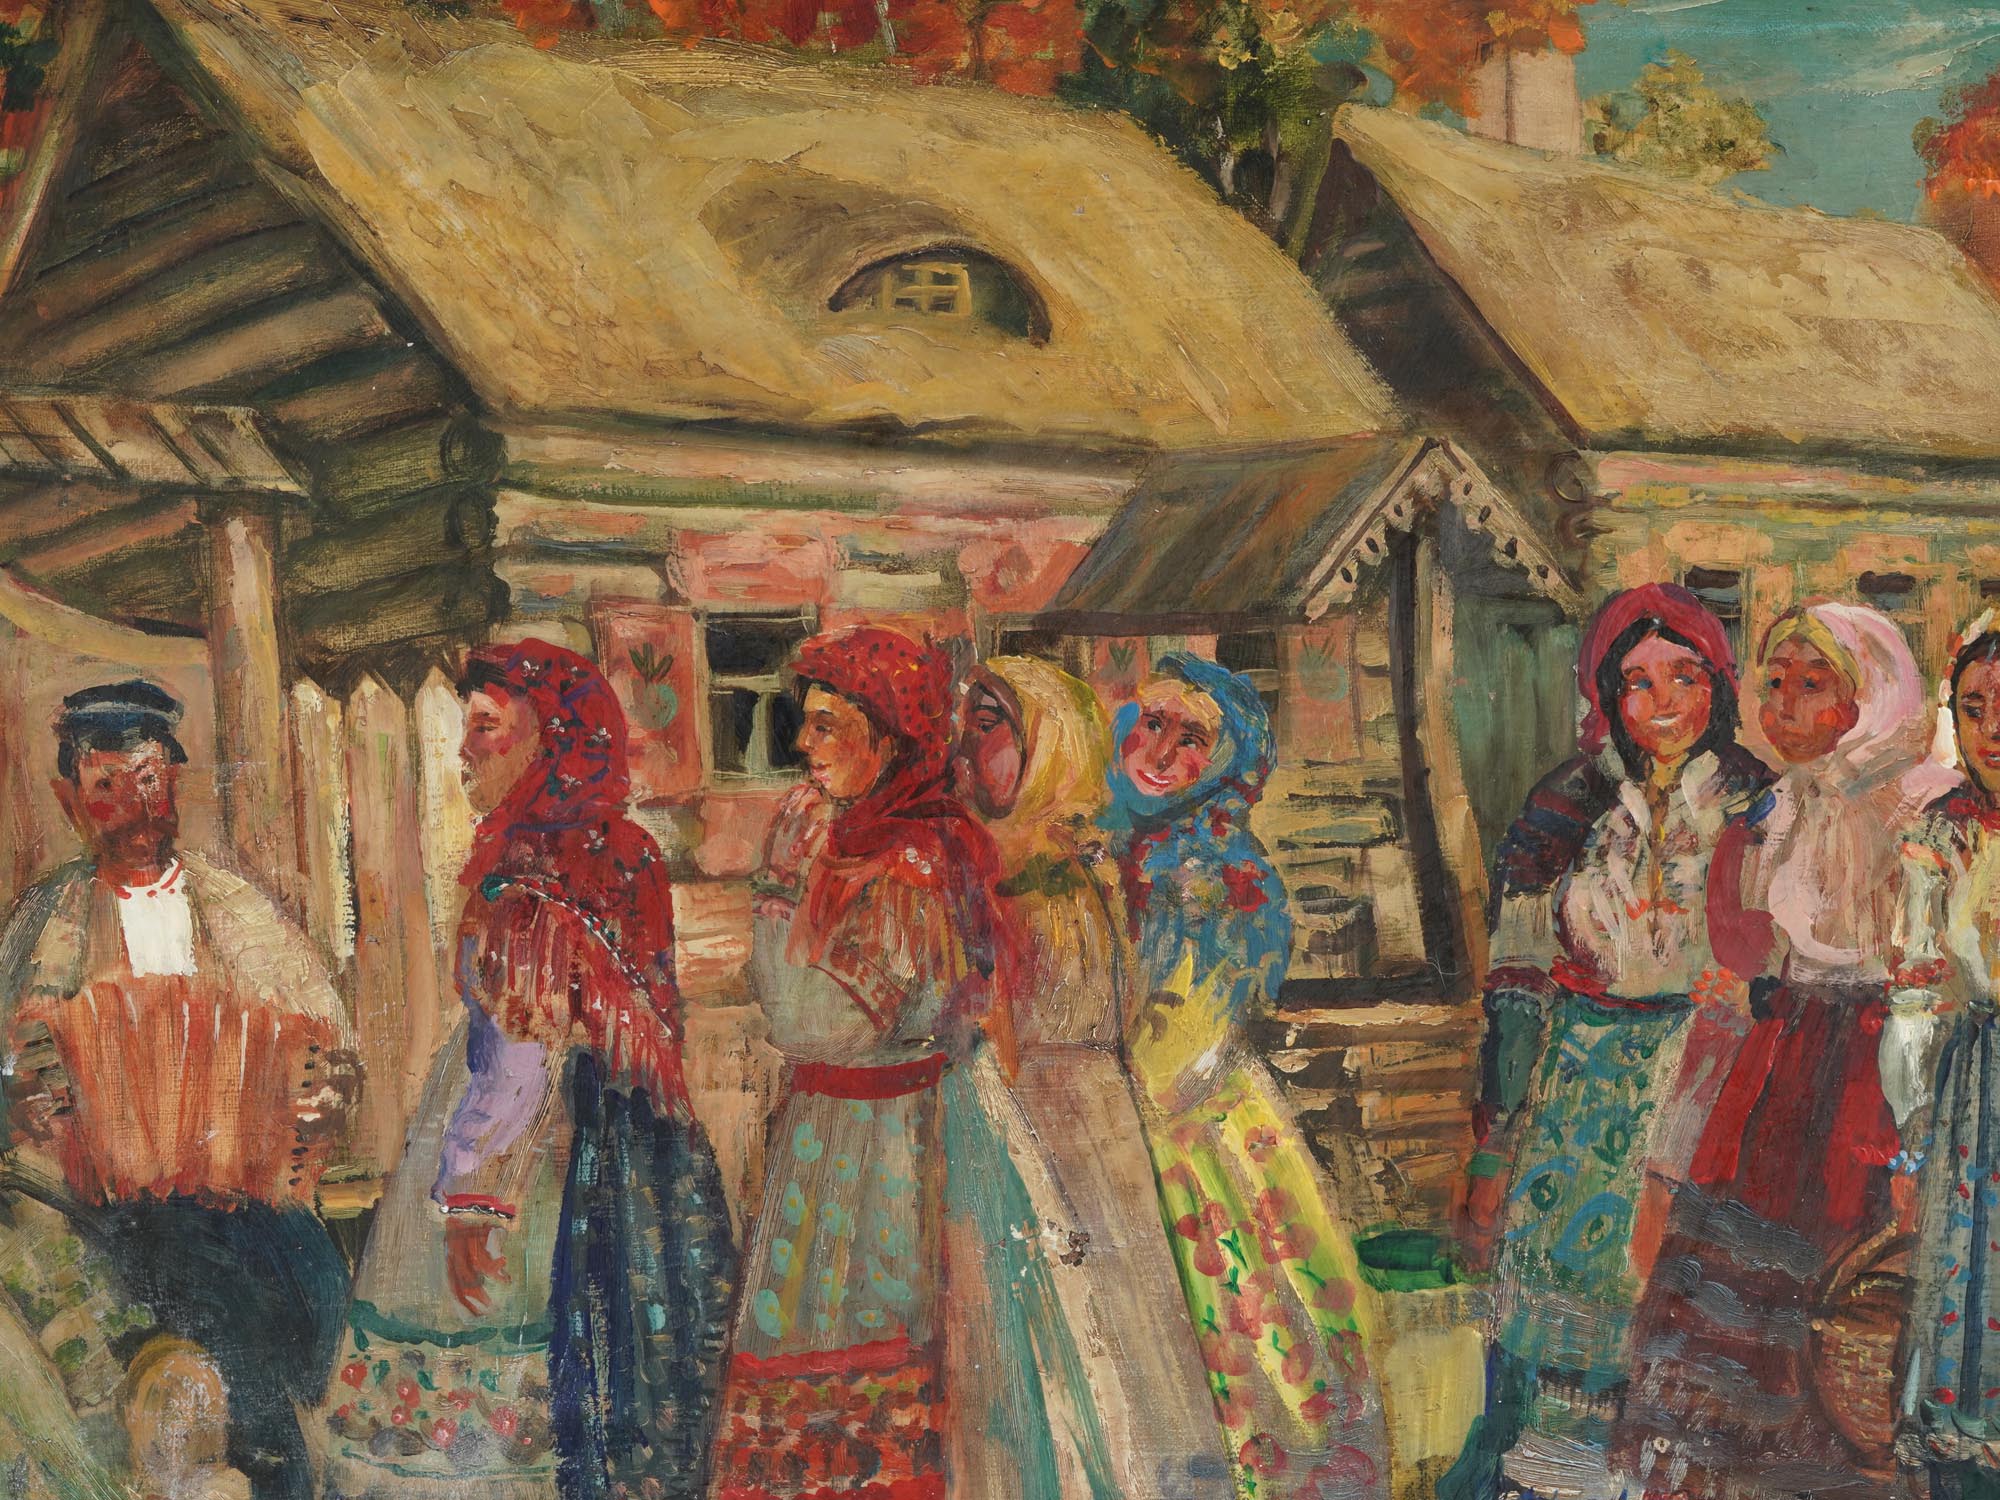 RUSSIAN VILLAGE OIL PAINTING BY ANDREI RIABUSHKIN PIC-2